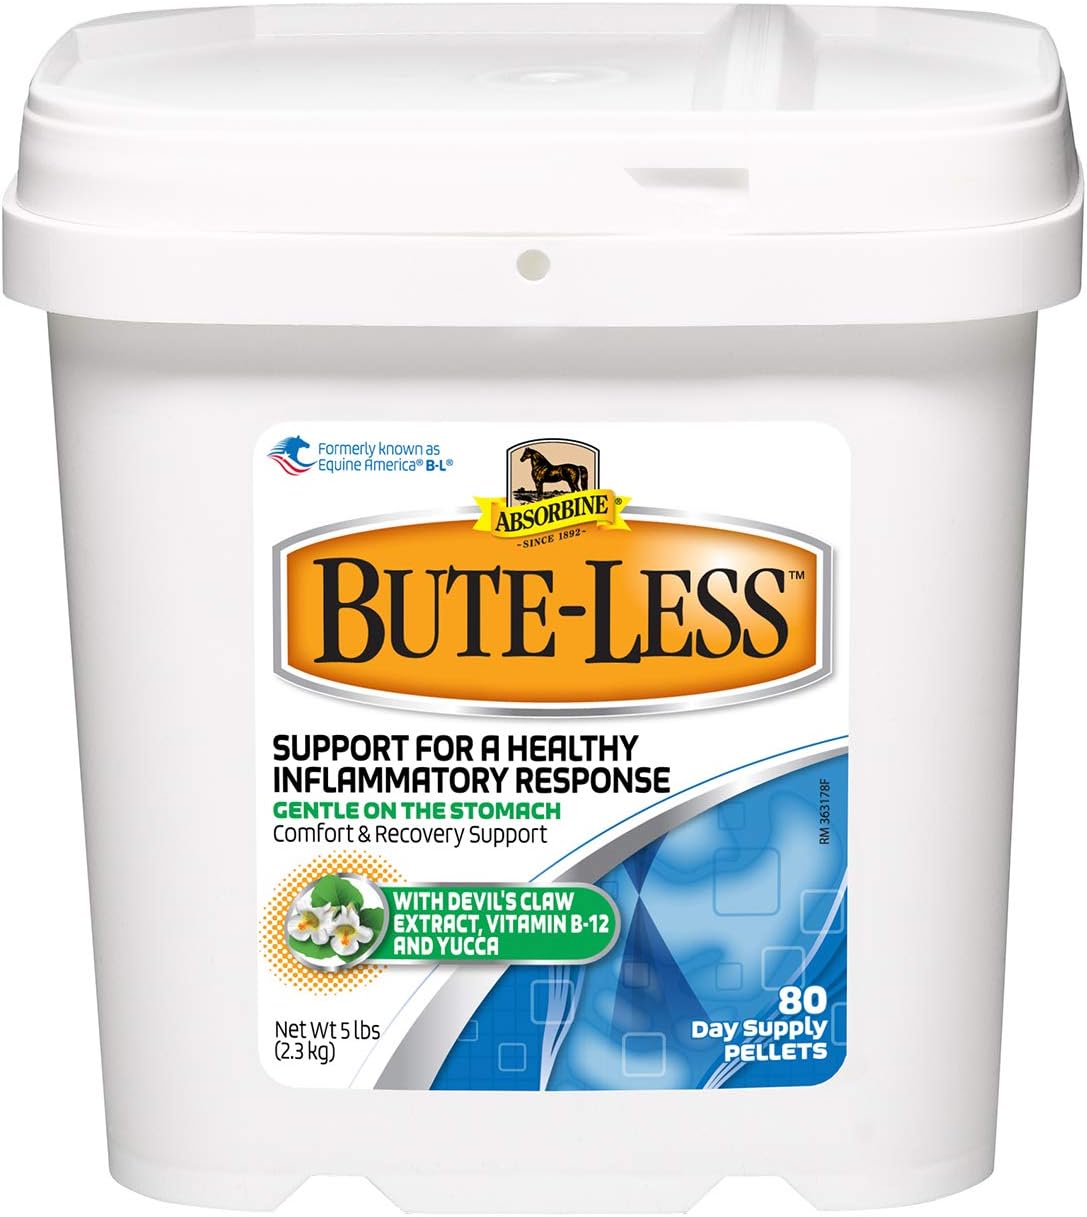 Absorbine Bute-Less Comfort & Recove…